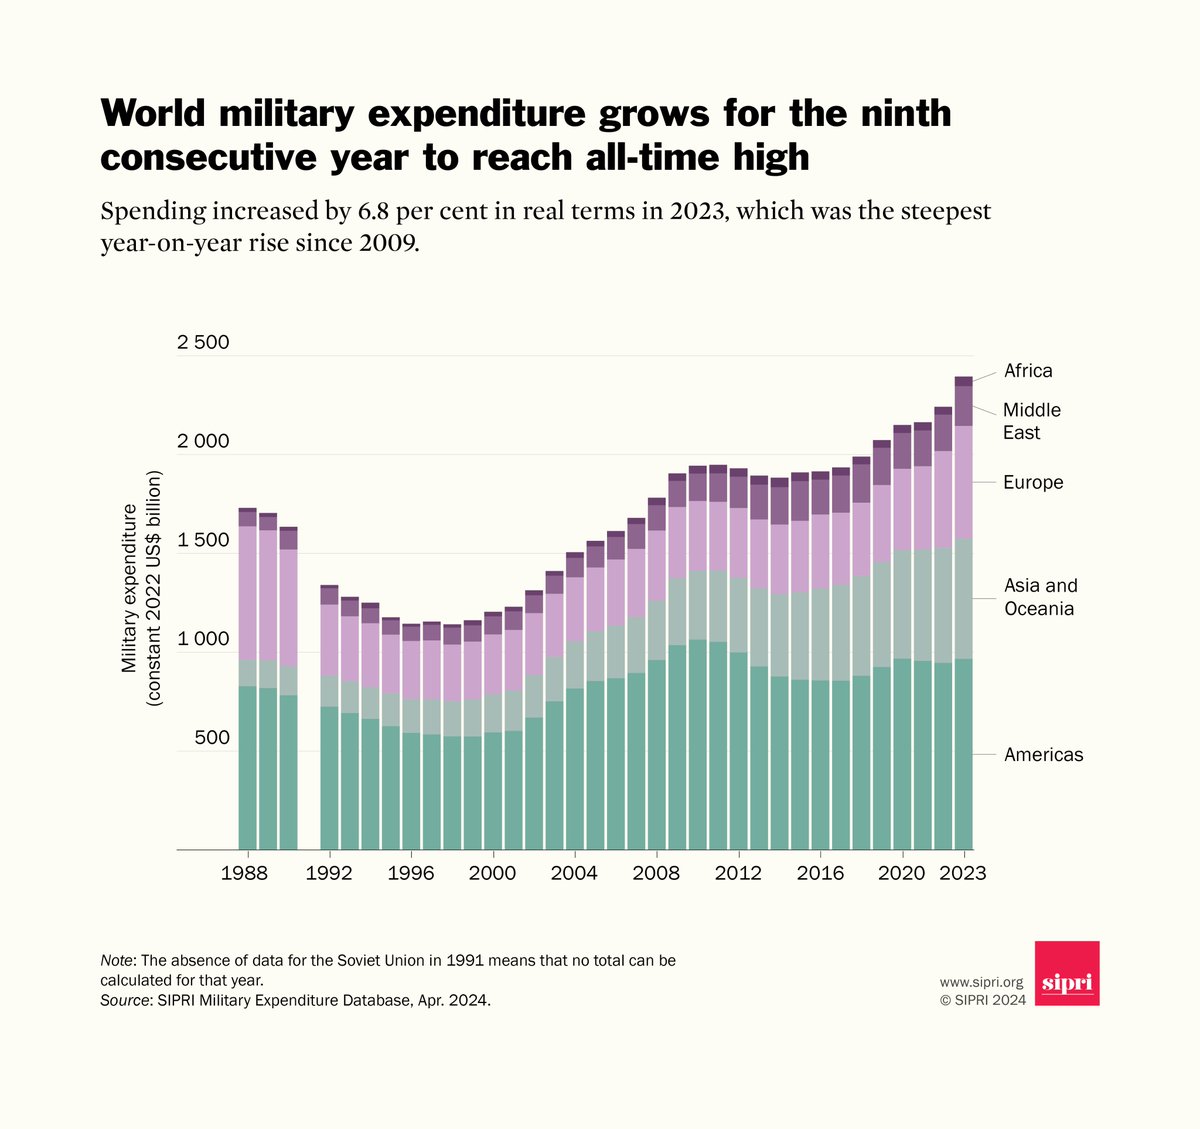 World military expenditure, driven by Russia’s🇷🇺 full-scale invasion of Ukraine🇺🇦 and heightened geopolitical tensions, rose by 6.8% to $2443 billion in 2023, the highest level ever recorded by SIPRI. Read more➡️ bit.ly/3w5FW8p